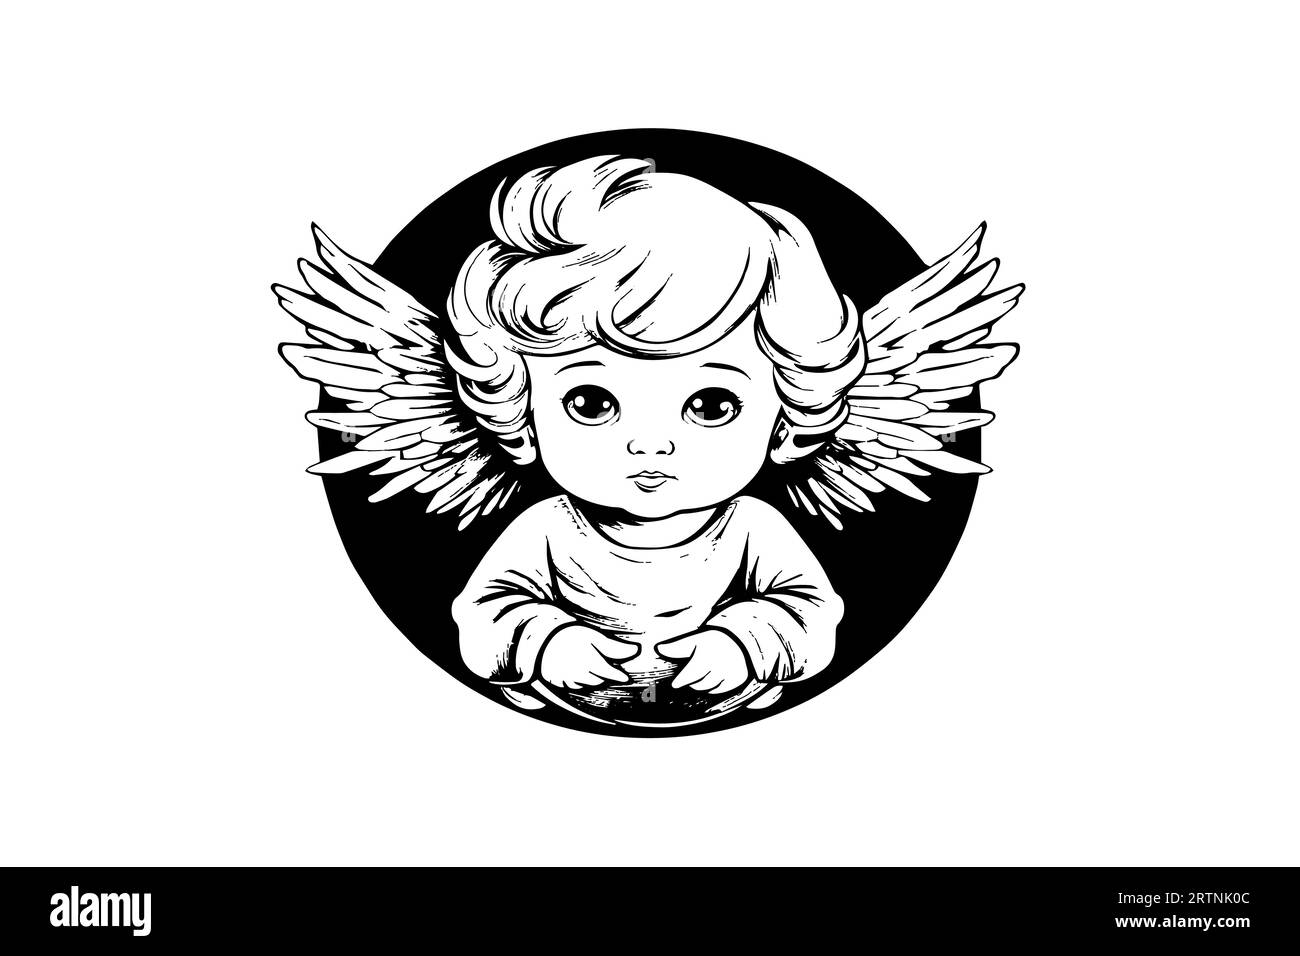 Little angel logotype vector retro style engraving black and white illustration. Cute baby with wings. Stock Vector